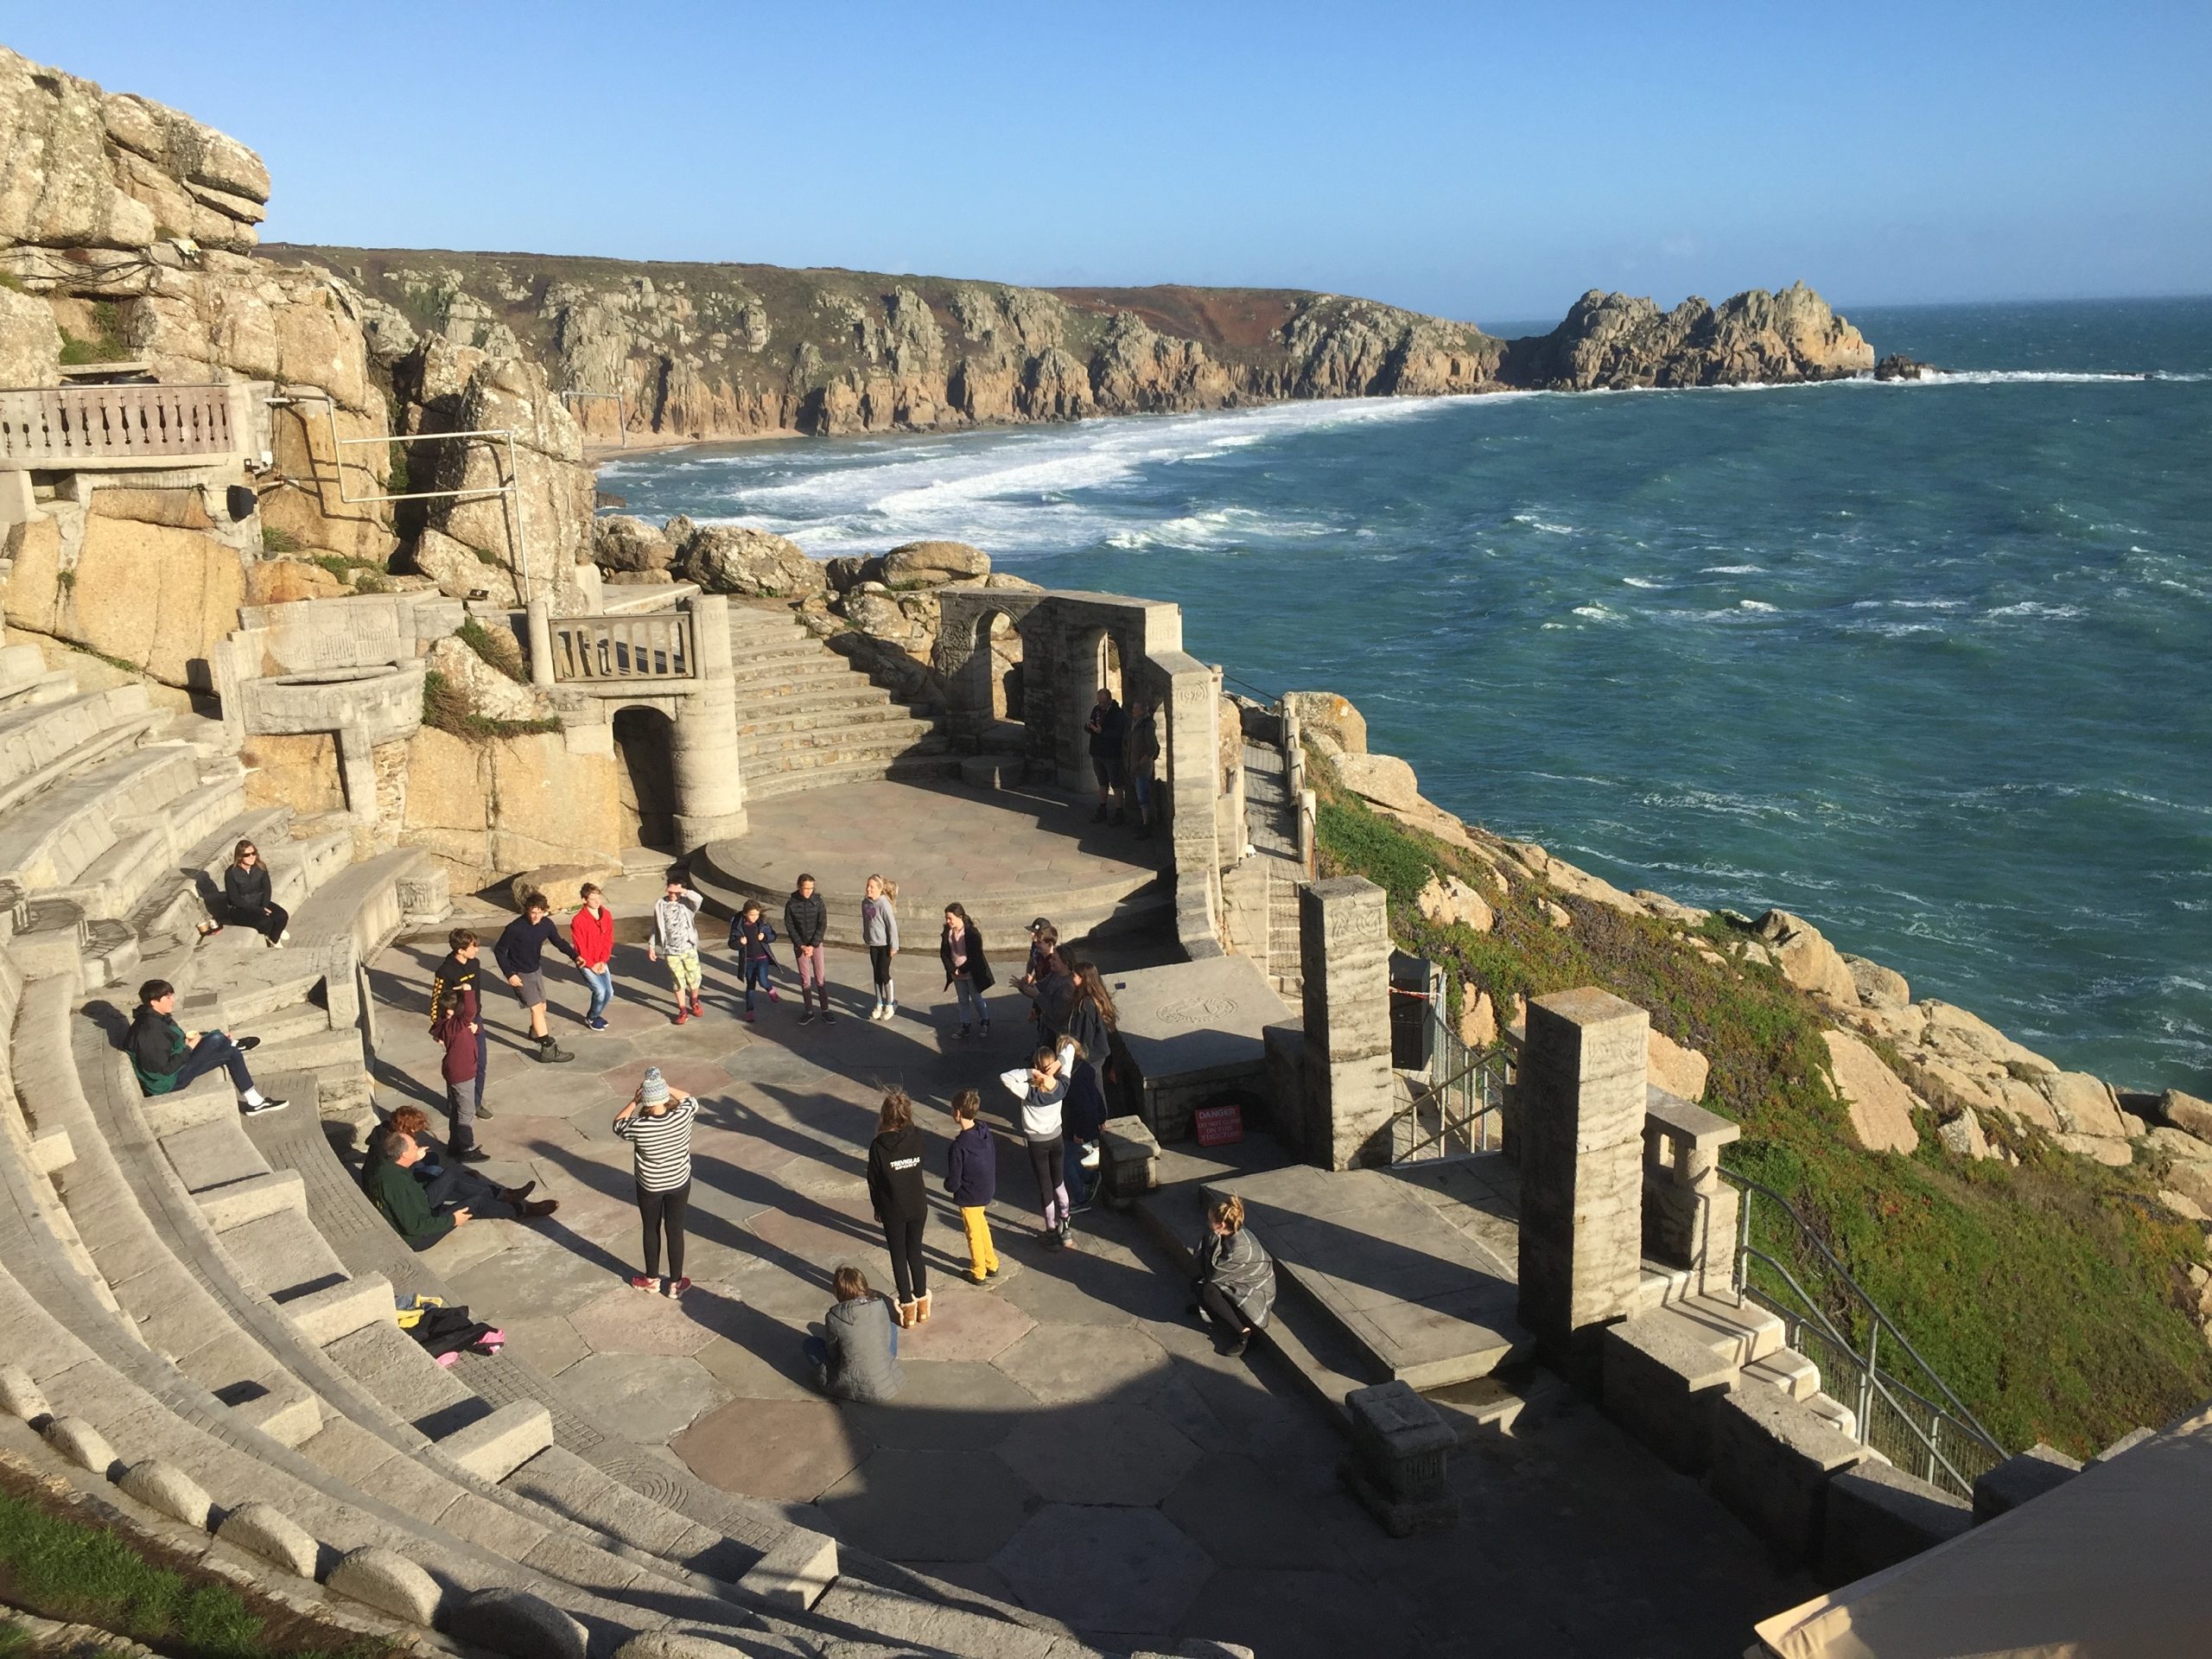 A coastal amphitheater with people sitting on stone benches and others standing, overlooking a choppy sea surrounded by rugged cliffs under a bright blue sky.